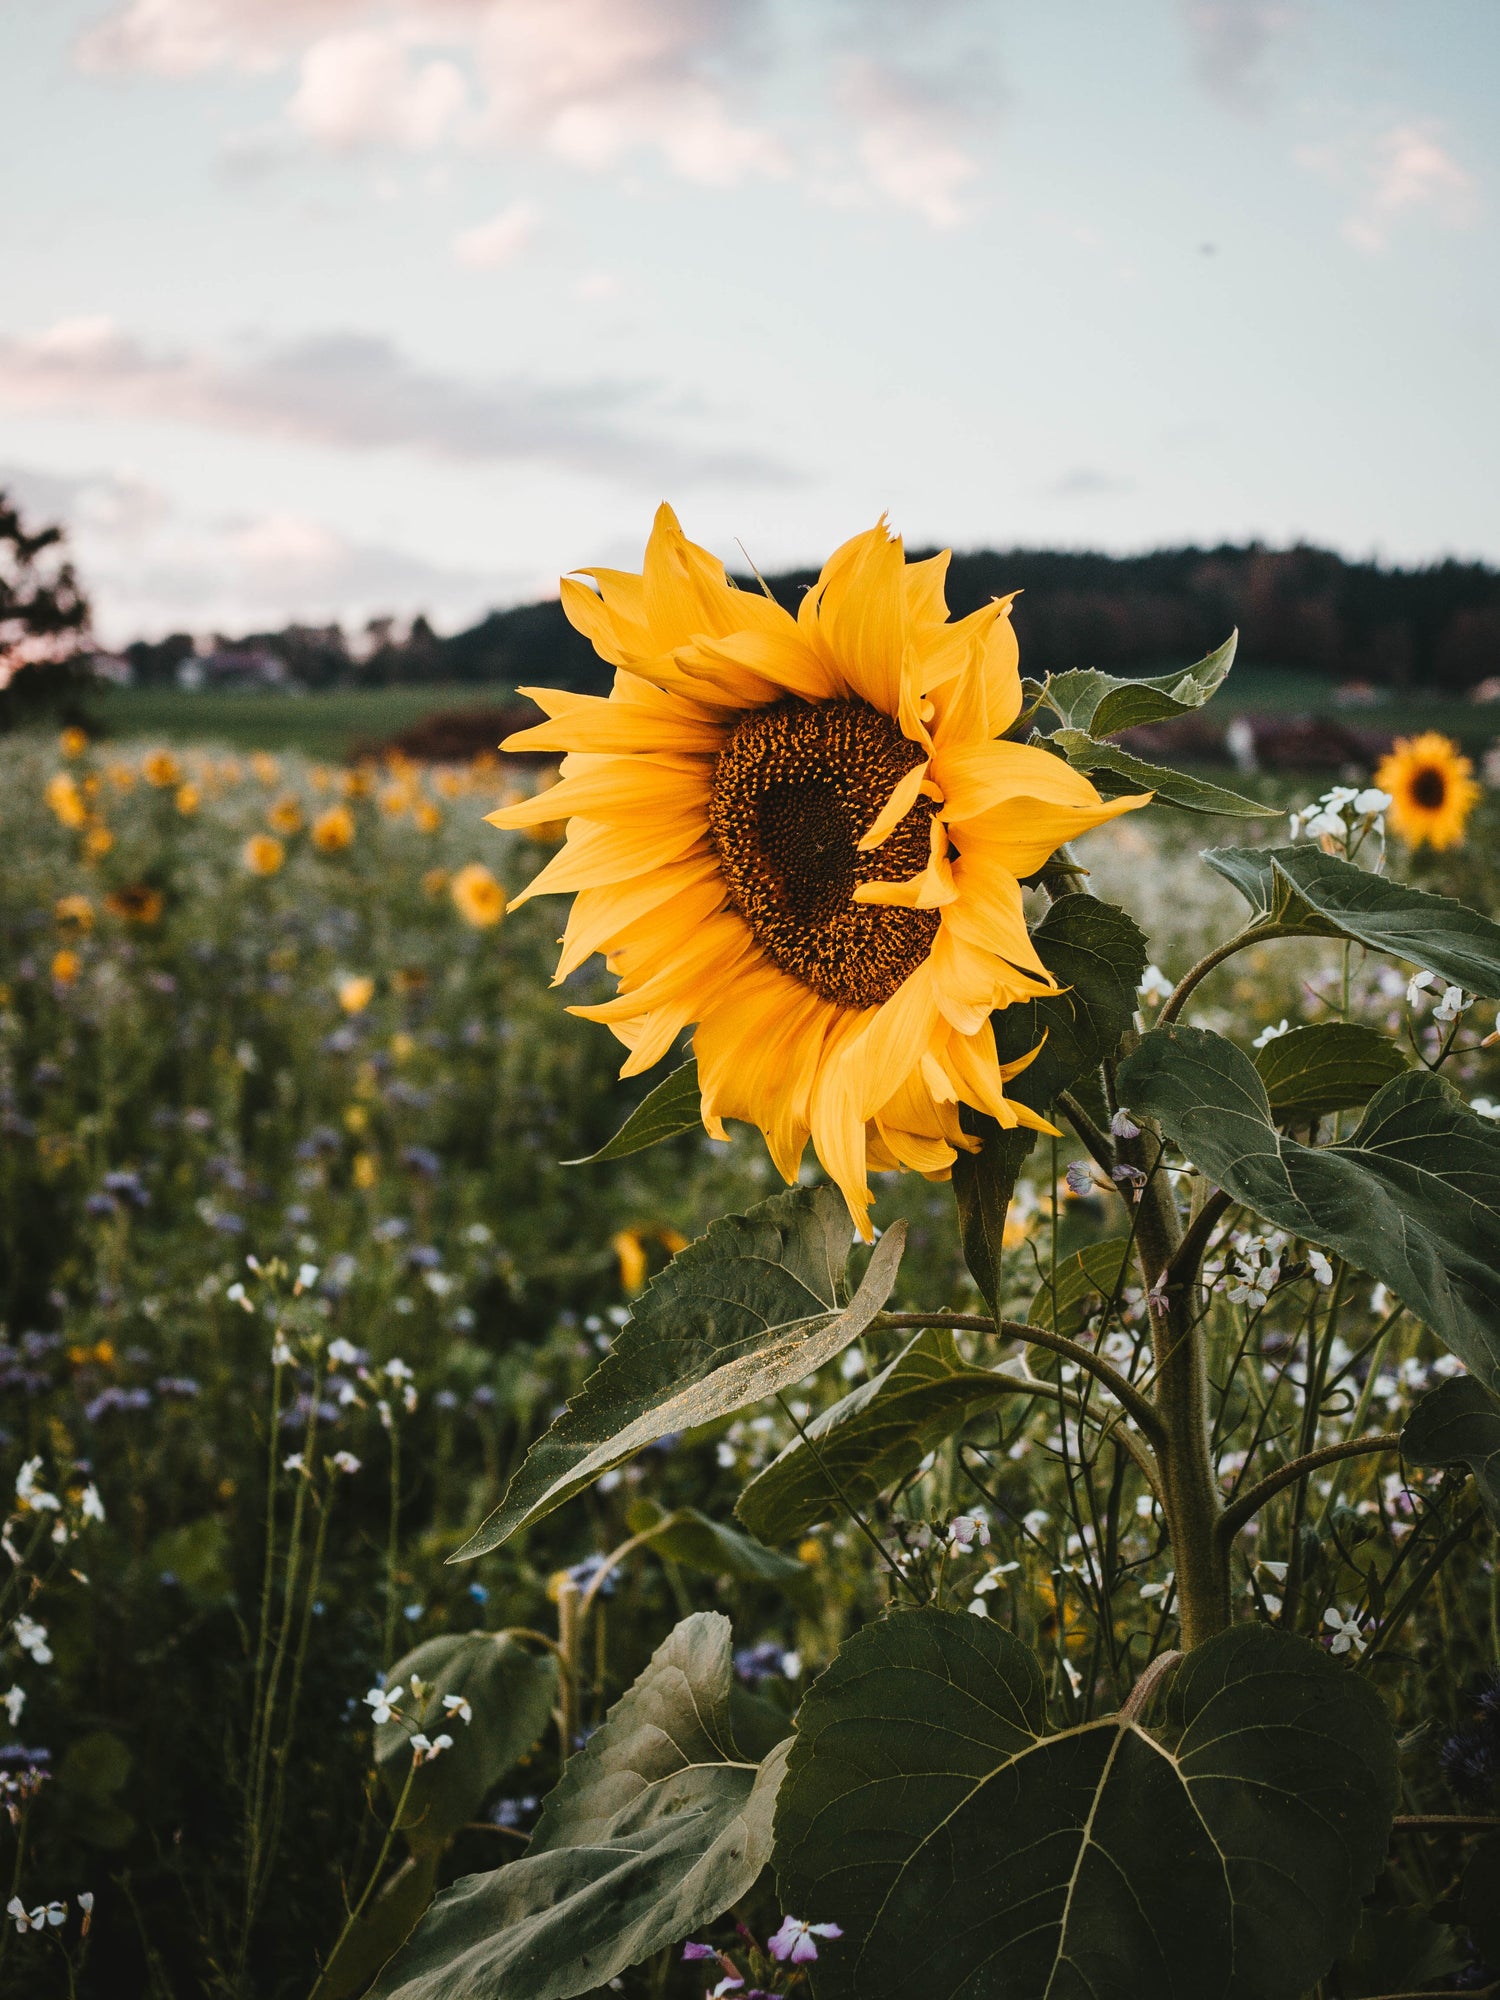 Sunflowers are a natural source of Vitamin E